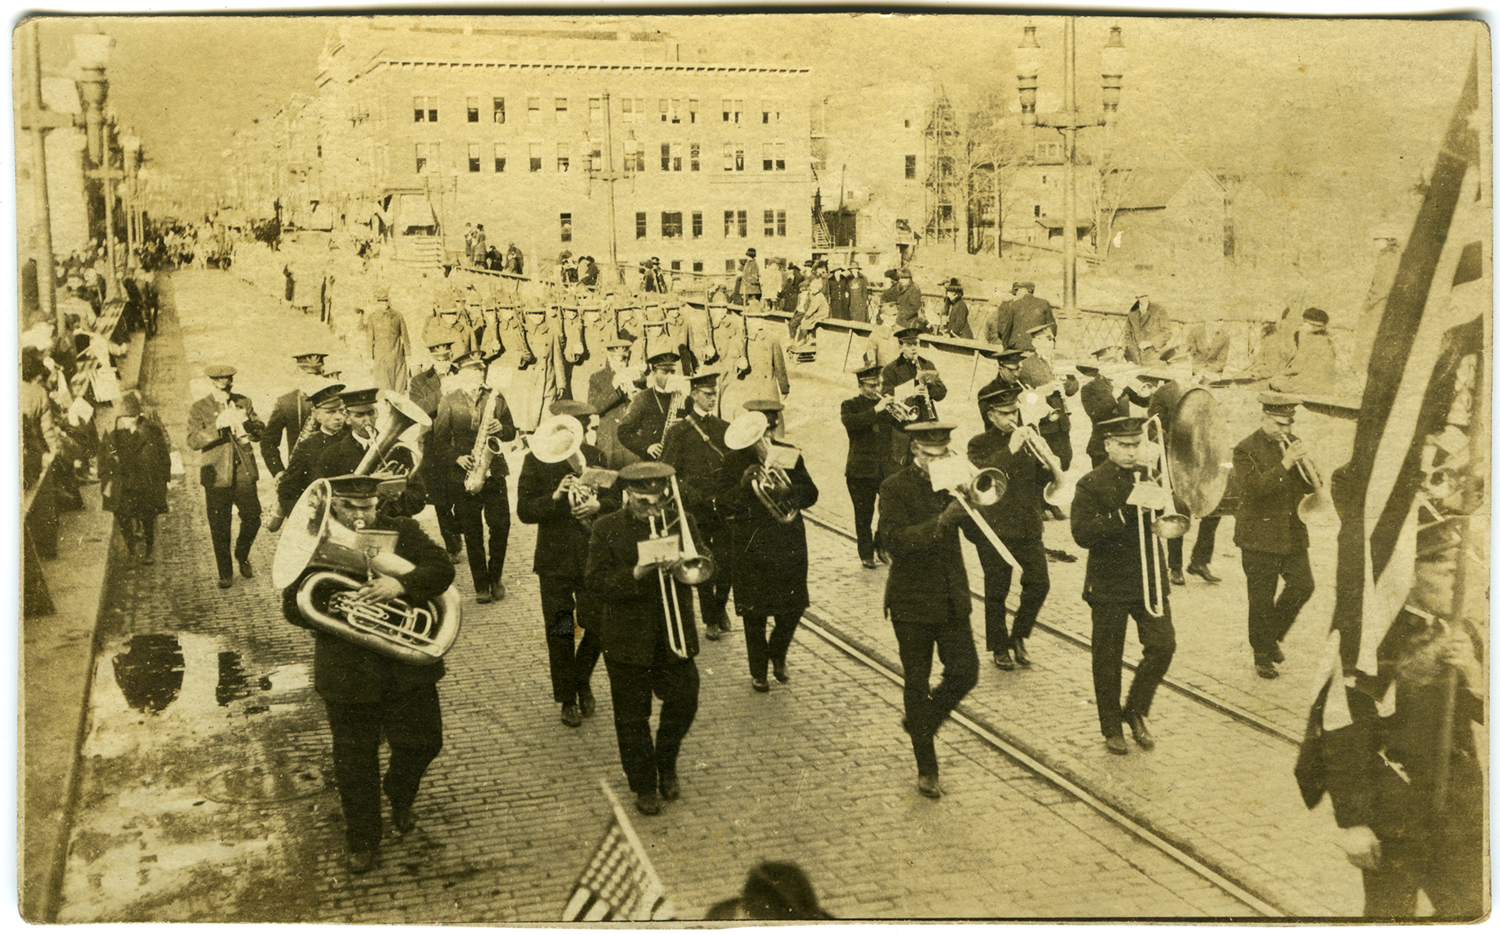  Printed as a photo postcard.&nbsp;"Peace Day at Salamanca NY. Nov. 11, 1918. Was playing one of your old favorites "Bombasto" when this was snapped. Best Regards." 